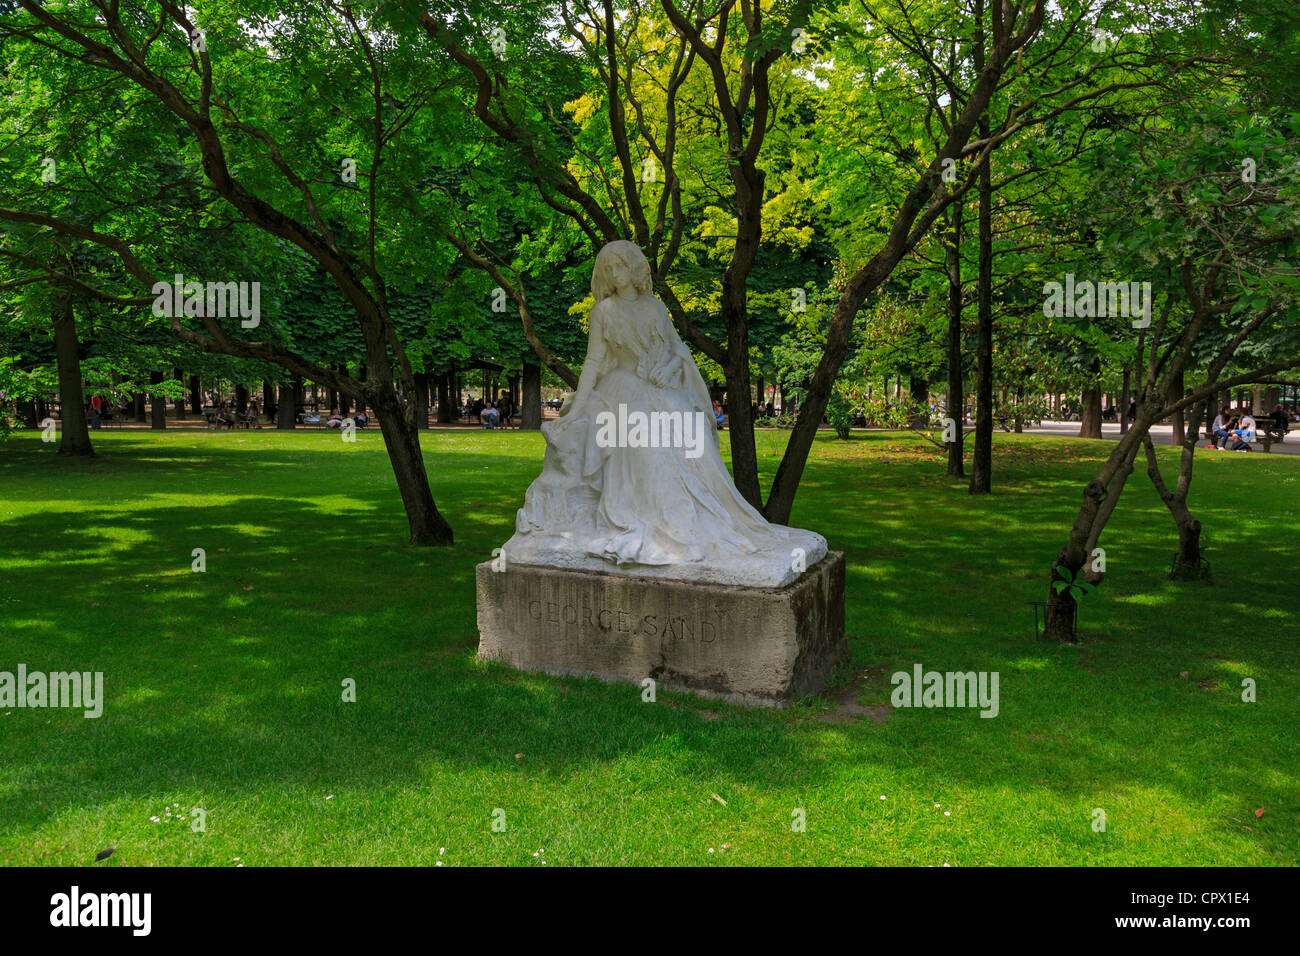 Statue of George Sand in Luxembourg Gardens, Paris. Stock Photo